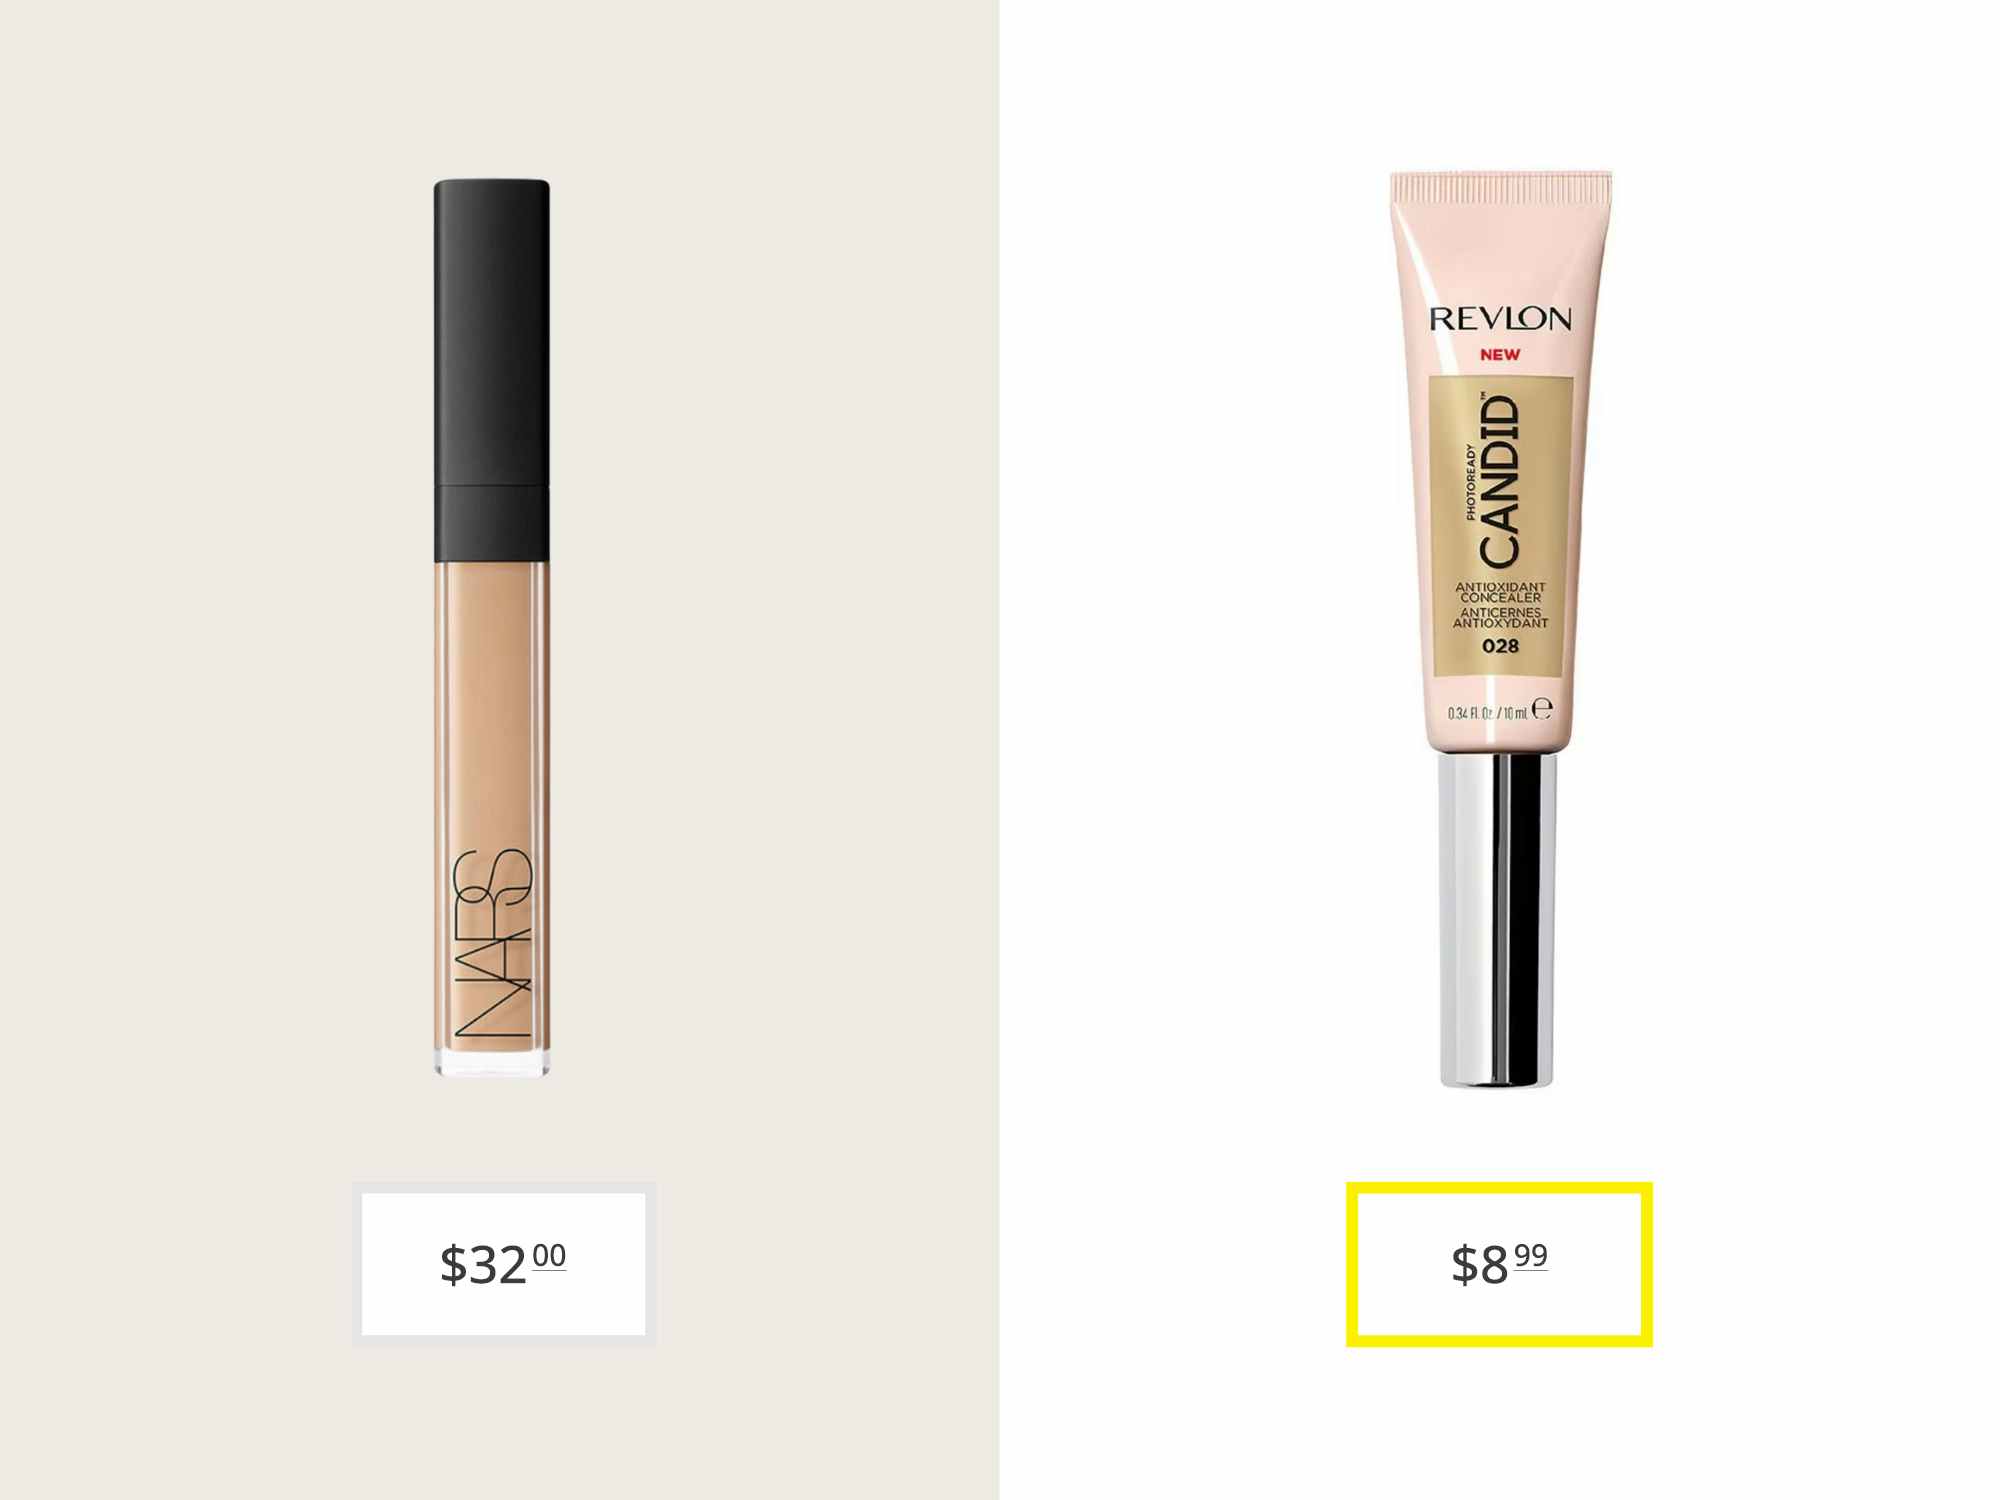 nars radiant creamy concealer and revlon photoready candid antioxidant concealer price comparison graphic